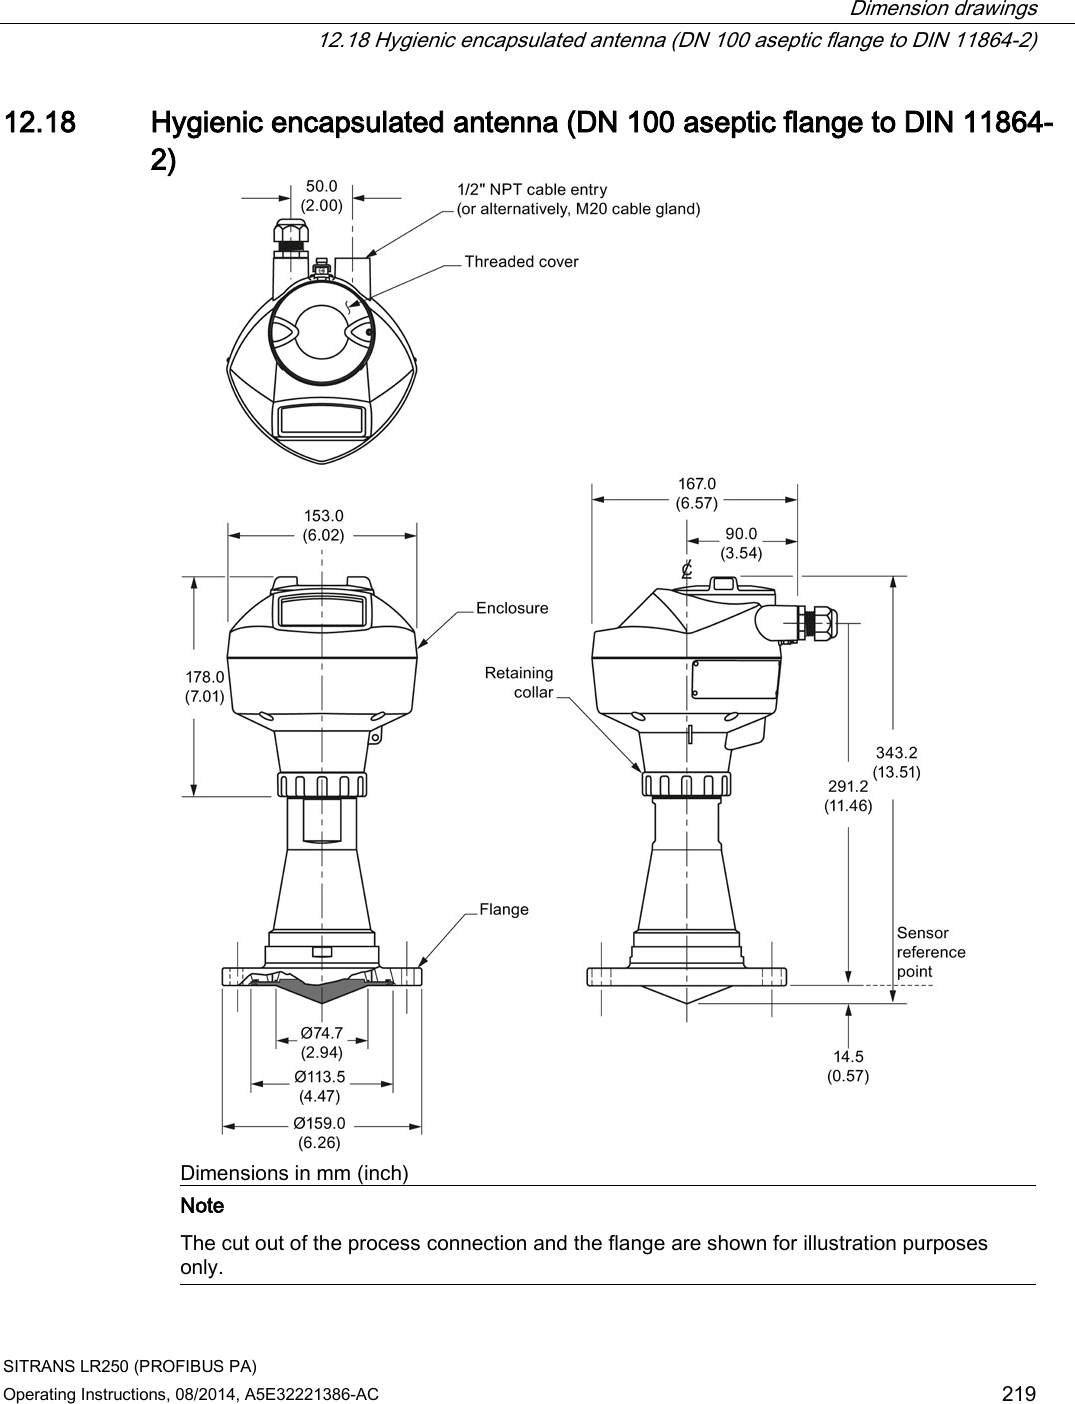  Dimension drawings  12.18 Hygienic encapsulated antenna (DN 100 aseptic flange to DIN 11864-2) SITRANS LR250 (PROFIBUS PA) Operating Instructions, 08/2014, A5E32221386-AC 219 12.18 Hygienic encapsulated antenna (DN 100 aseptic flange to DIN 11864-2)  Dimensions in mm (inch)  Note The cut out of the process connection and the flange are shown for illustration purposes only.  